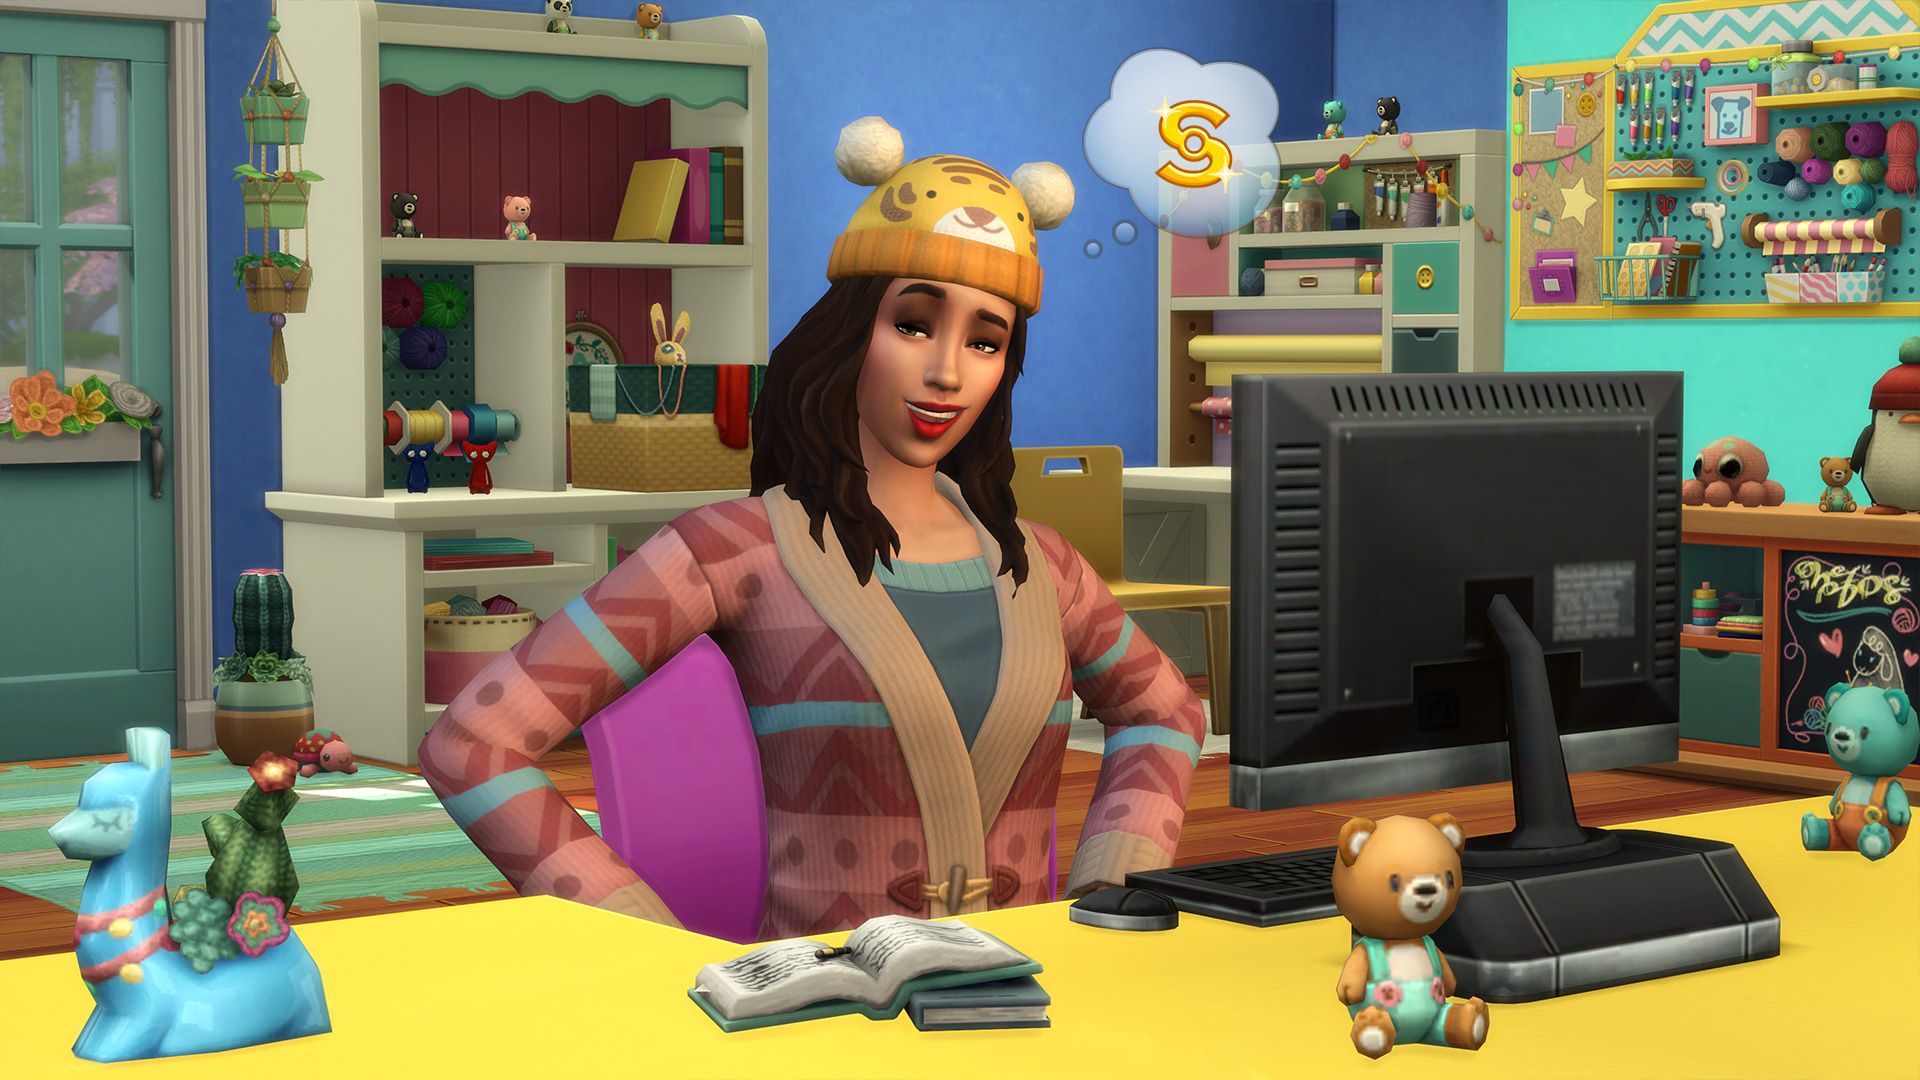 Sims 4 Nifty Knitting Stuff Pack trailer, release date unveiled